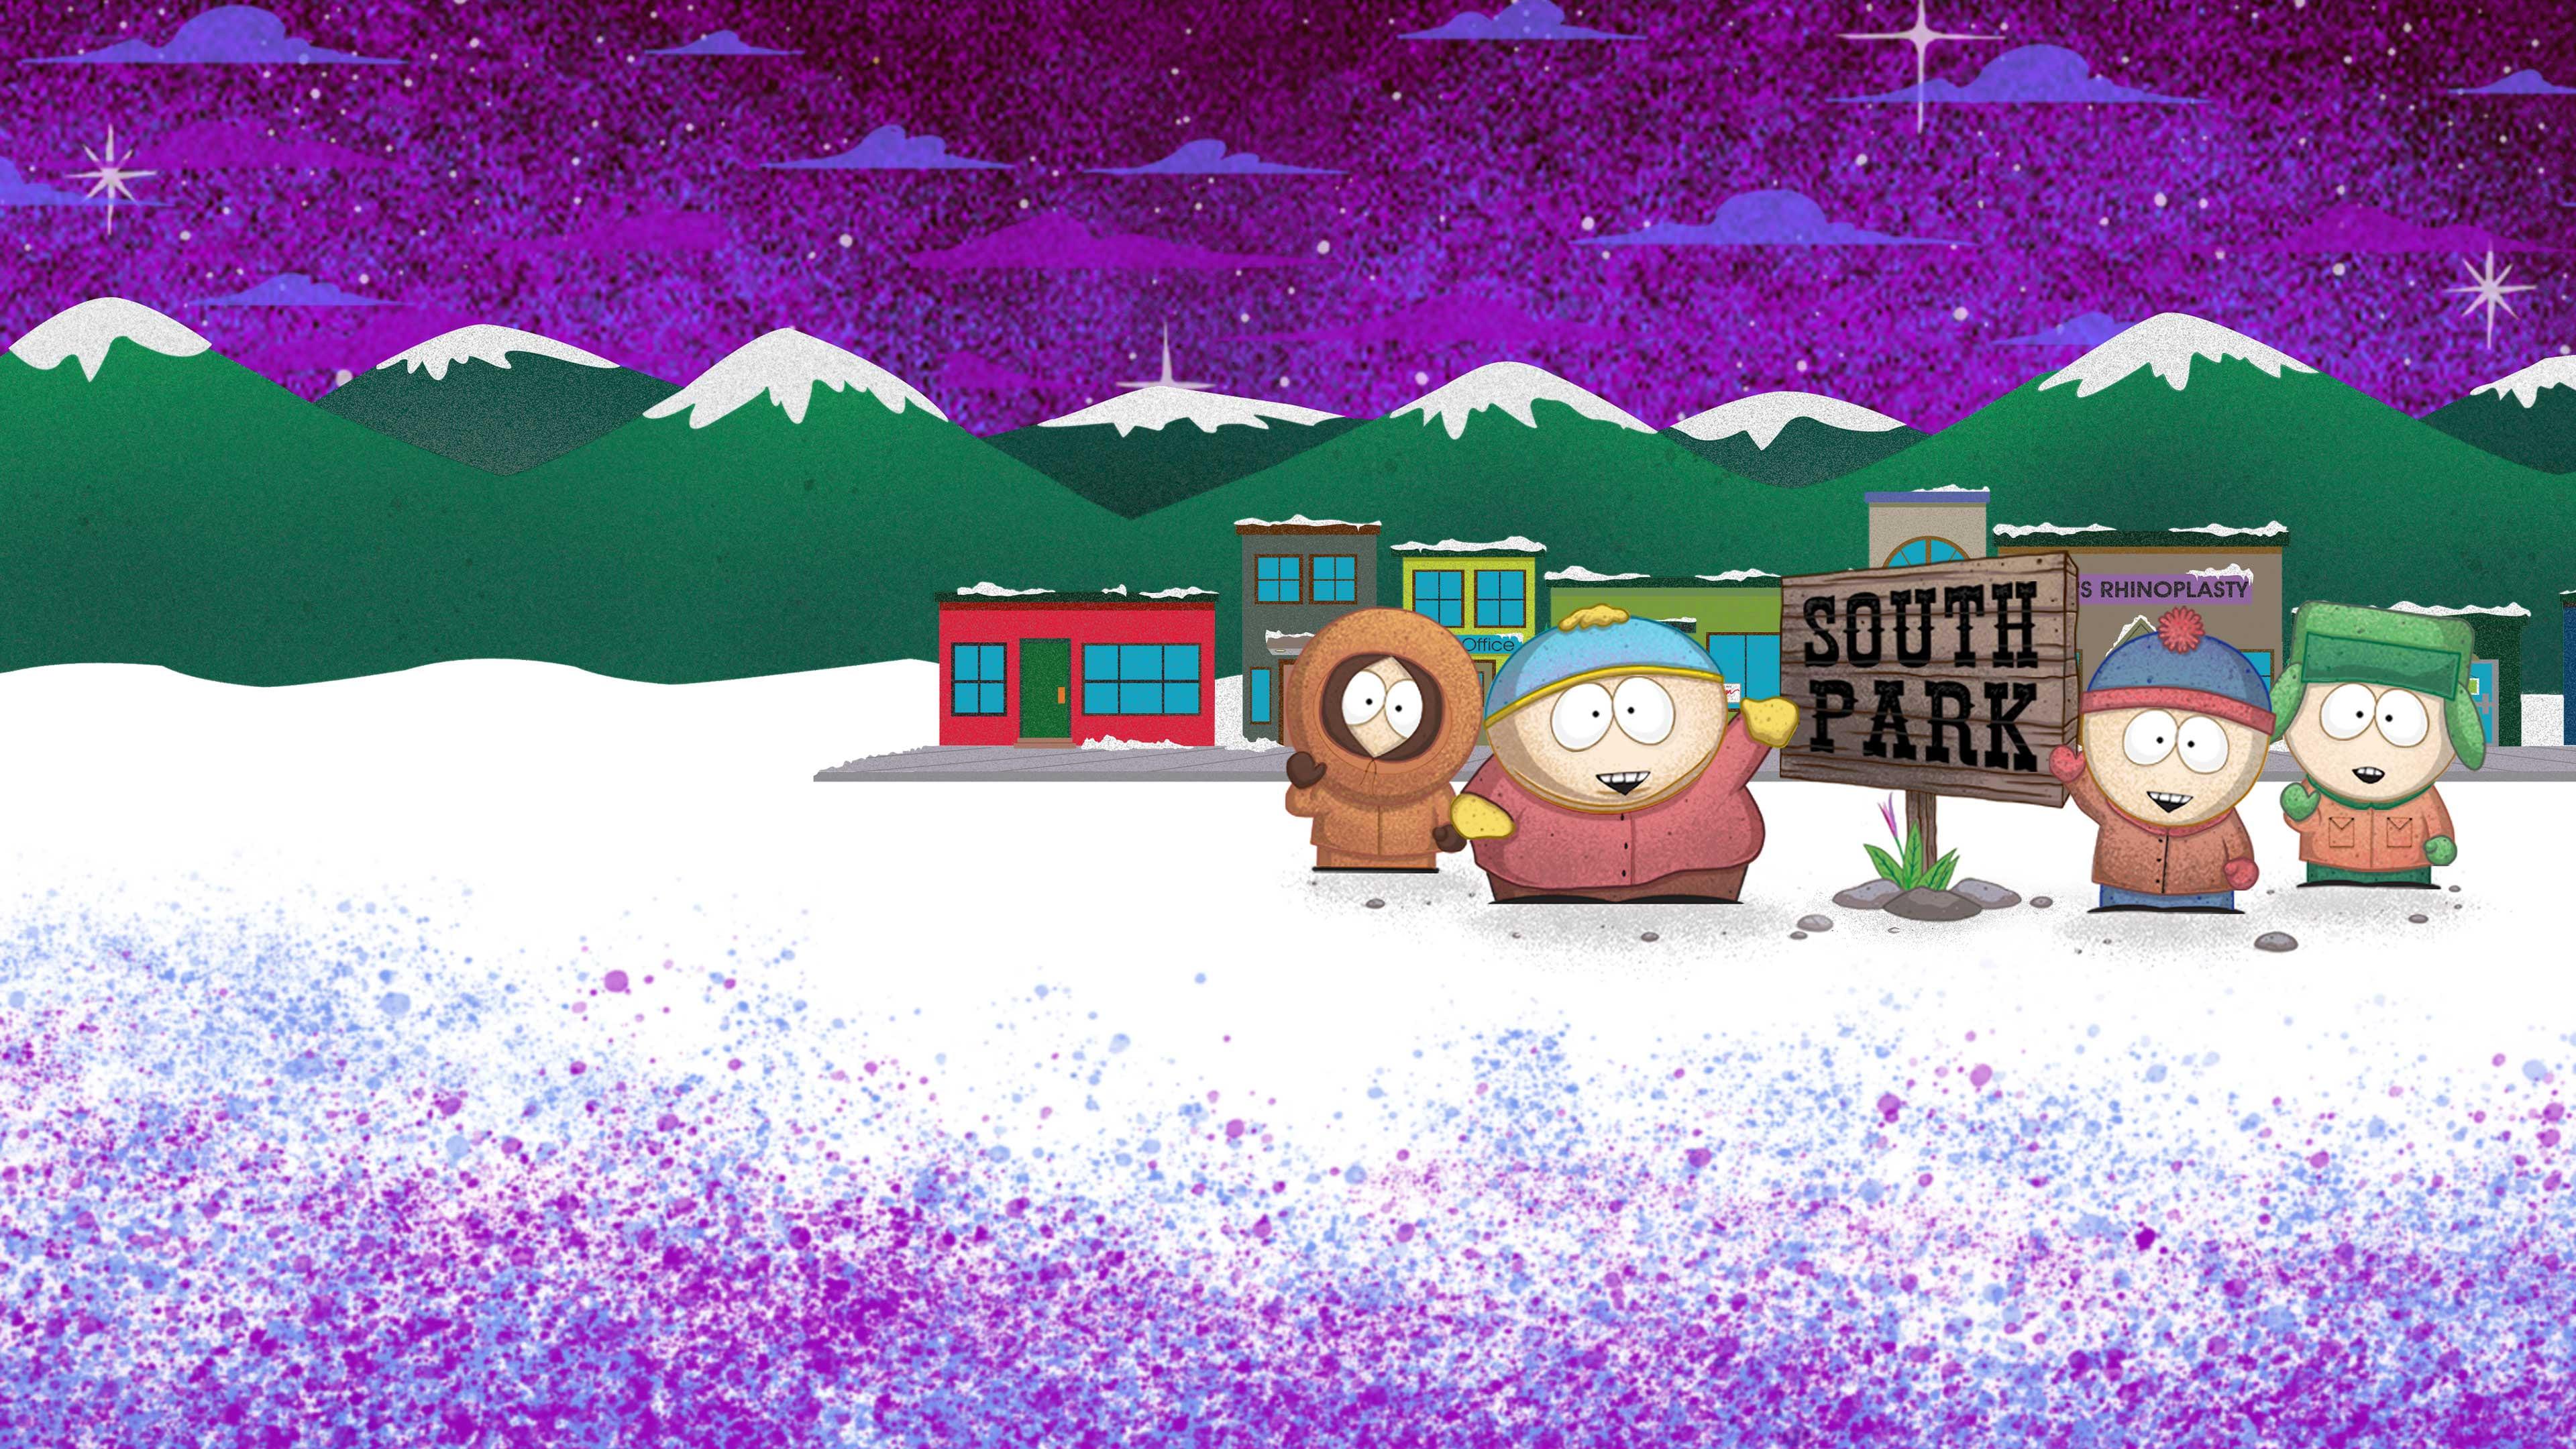 South Park: The 25th Anniversary Concert backdrop